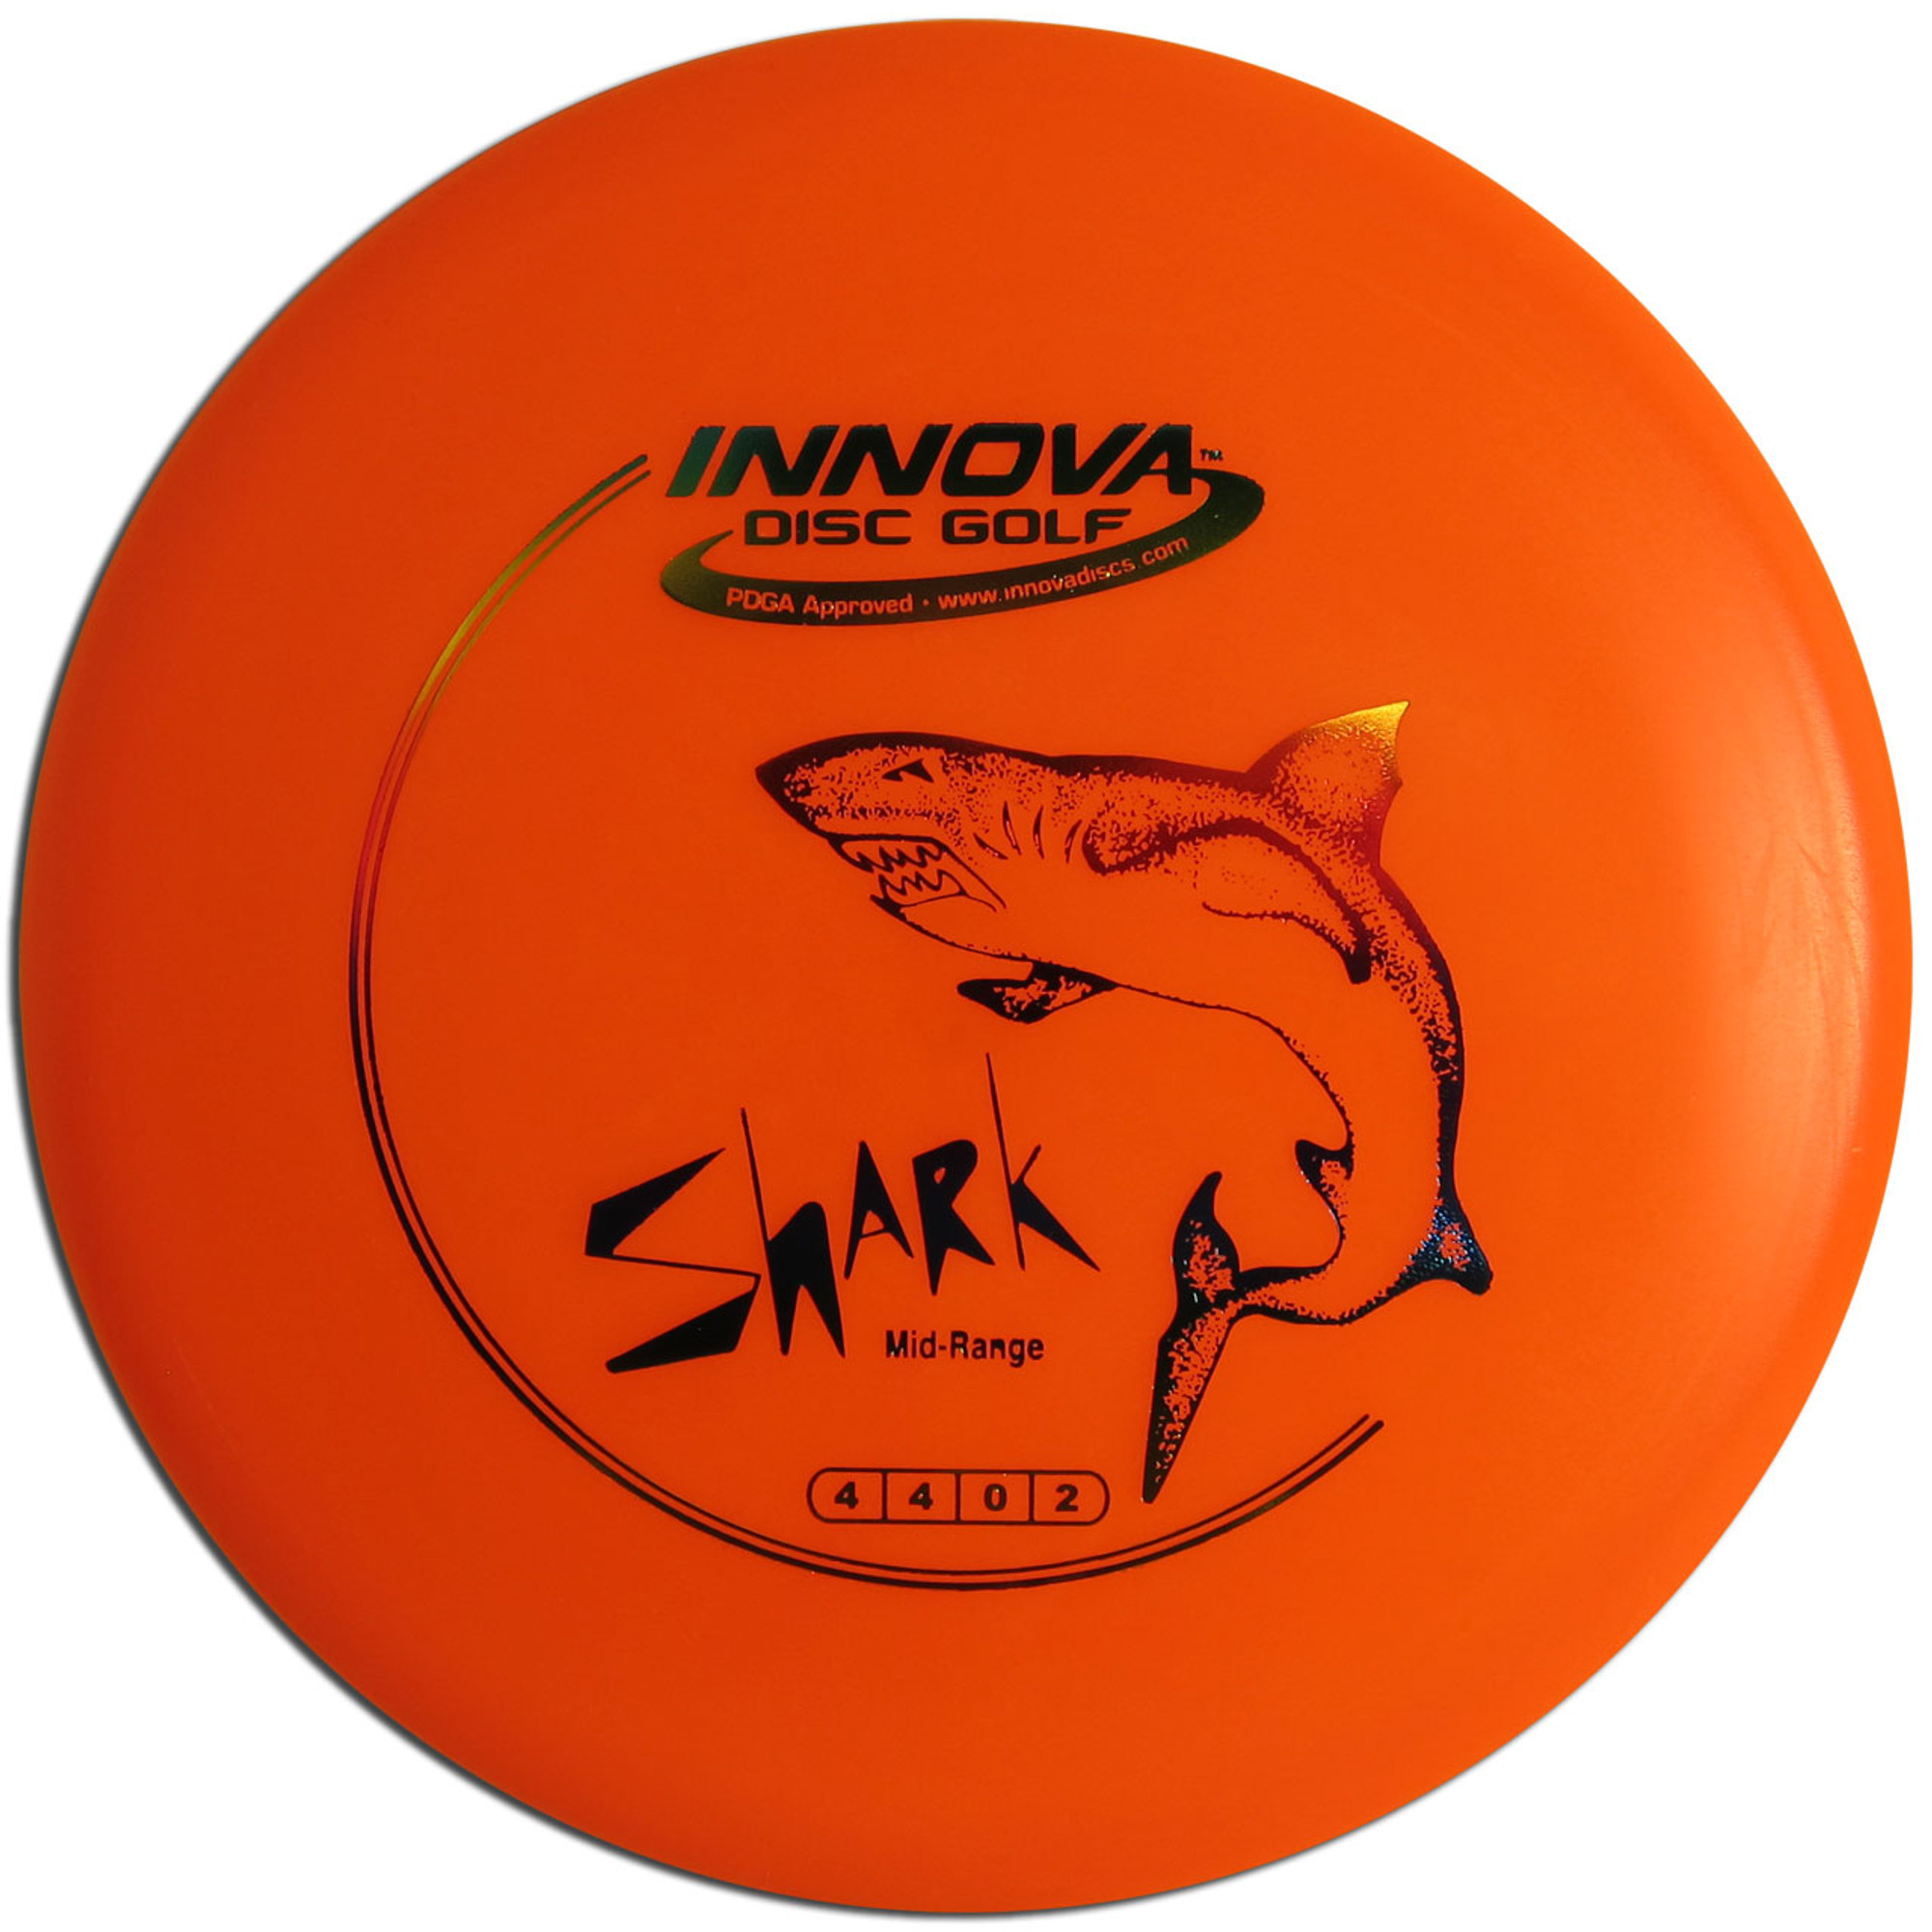 Innova Beginner Set - Includes 3 Discs + Mini Marker - THE WRIGHT LIFE  ACTION SPORTING GOODS STORE